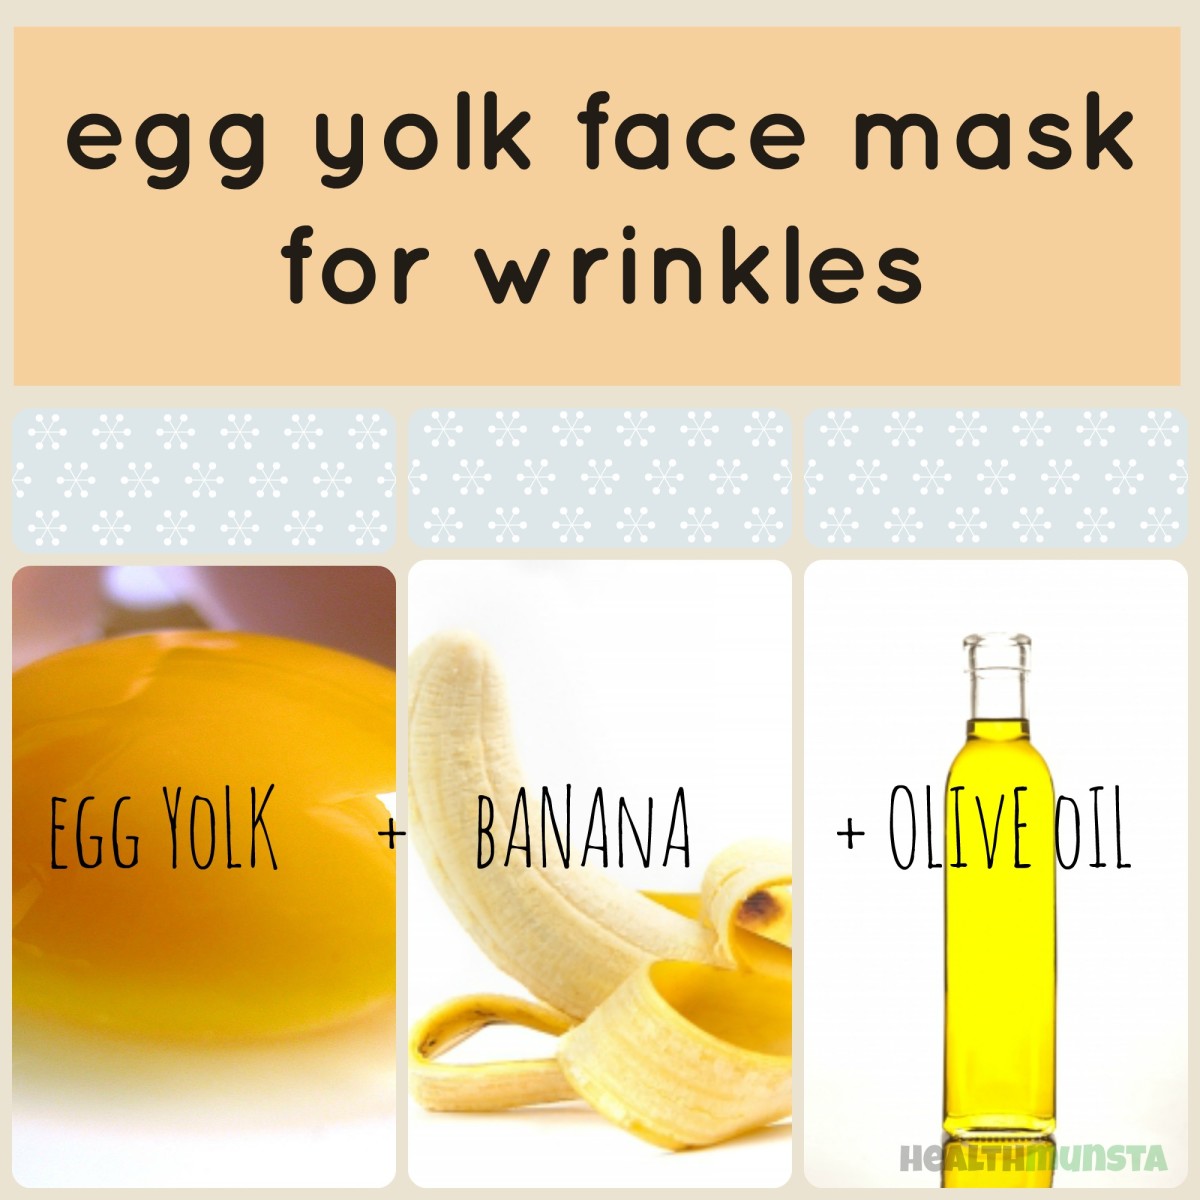 This egg-yolk face mask is perfect for treating wrinkles.